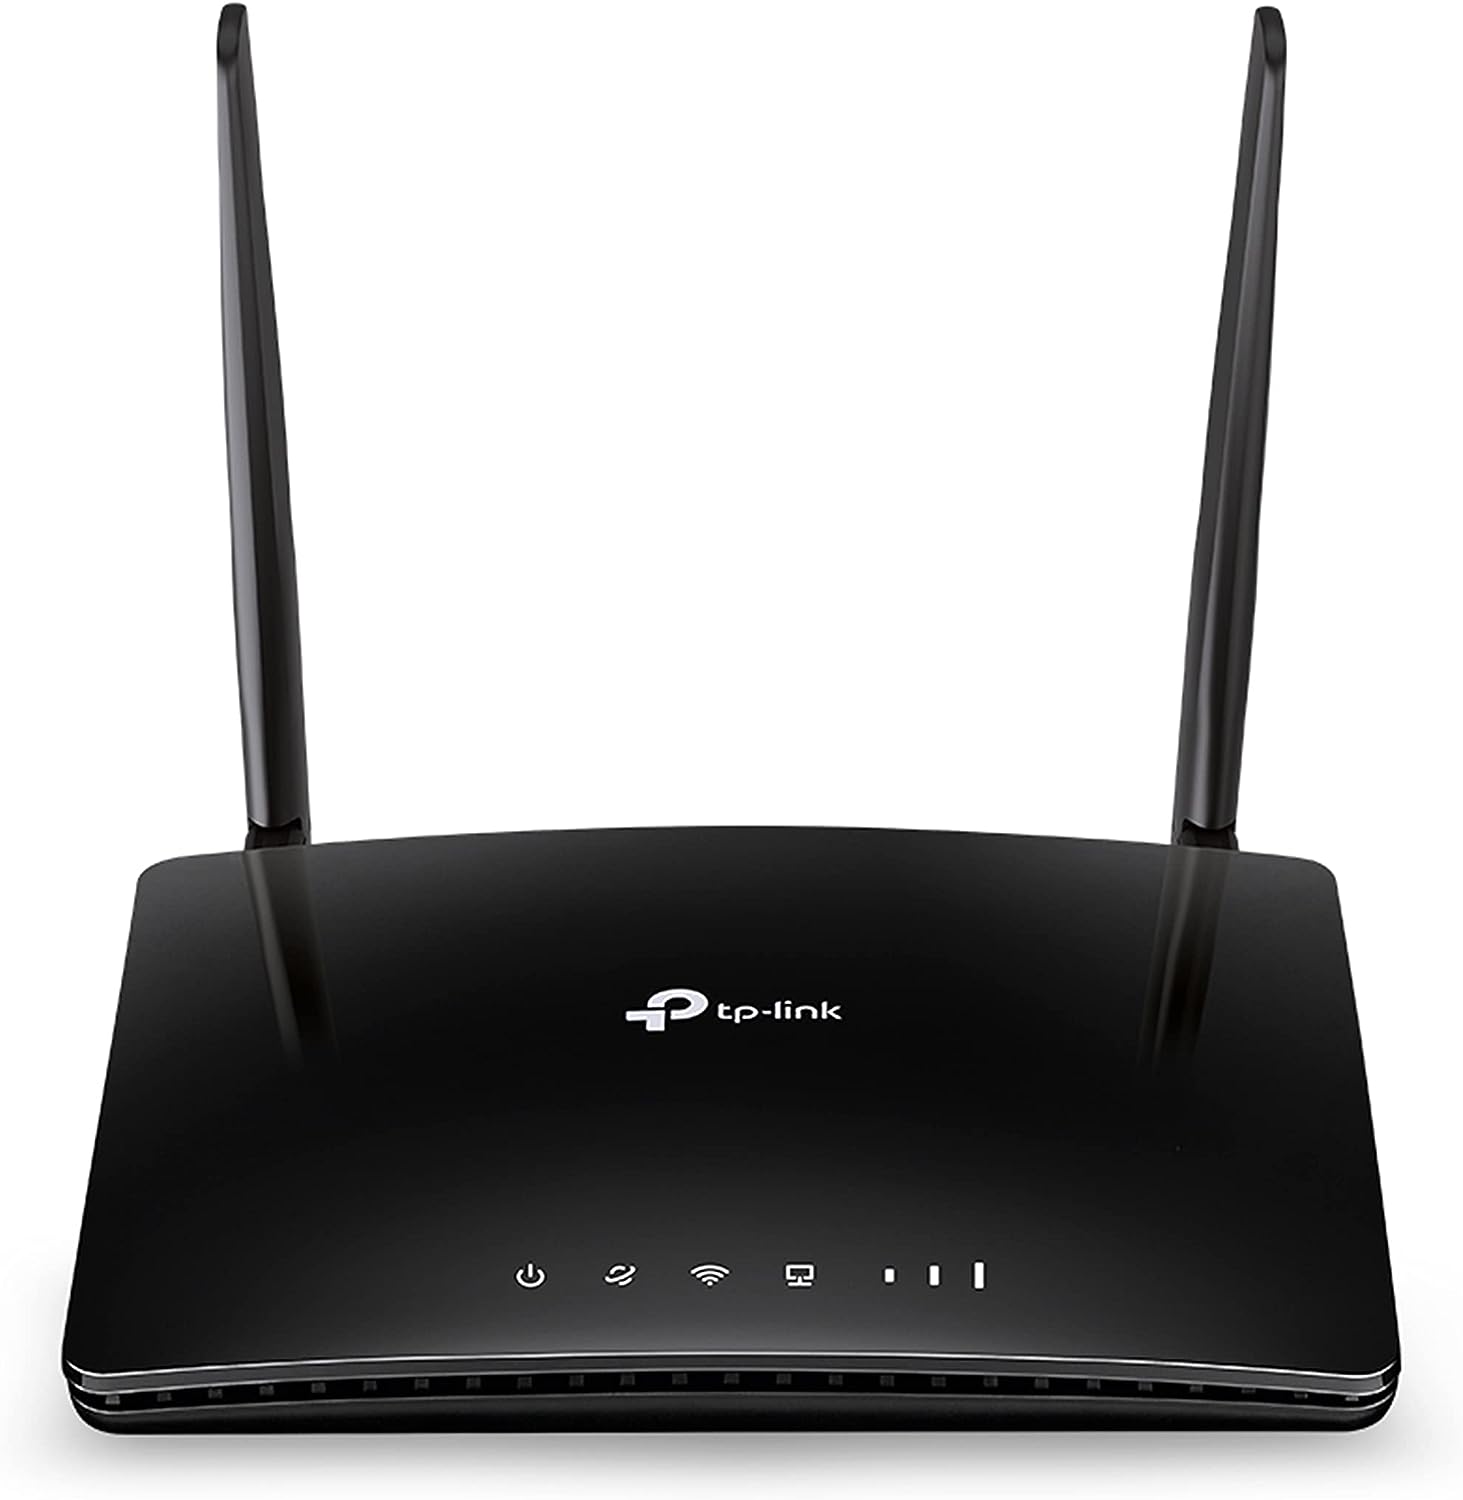 TP-Link Archer Wireless Dual Band Router AC750